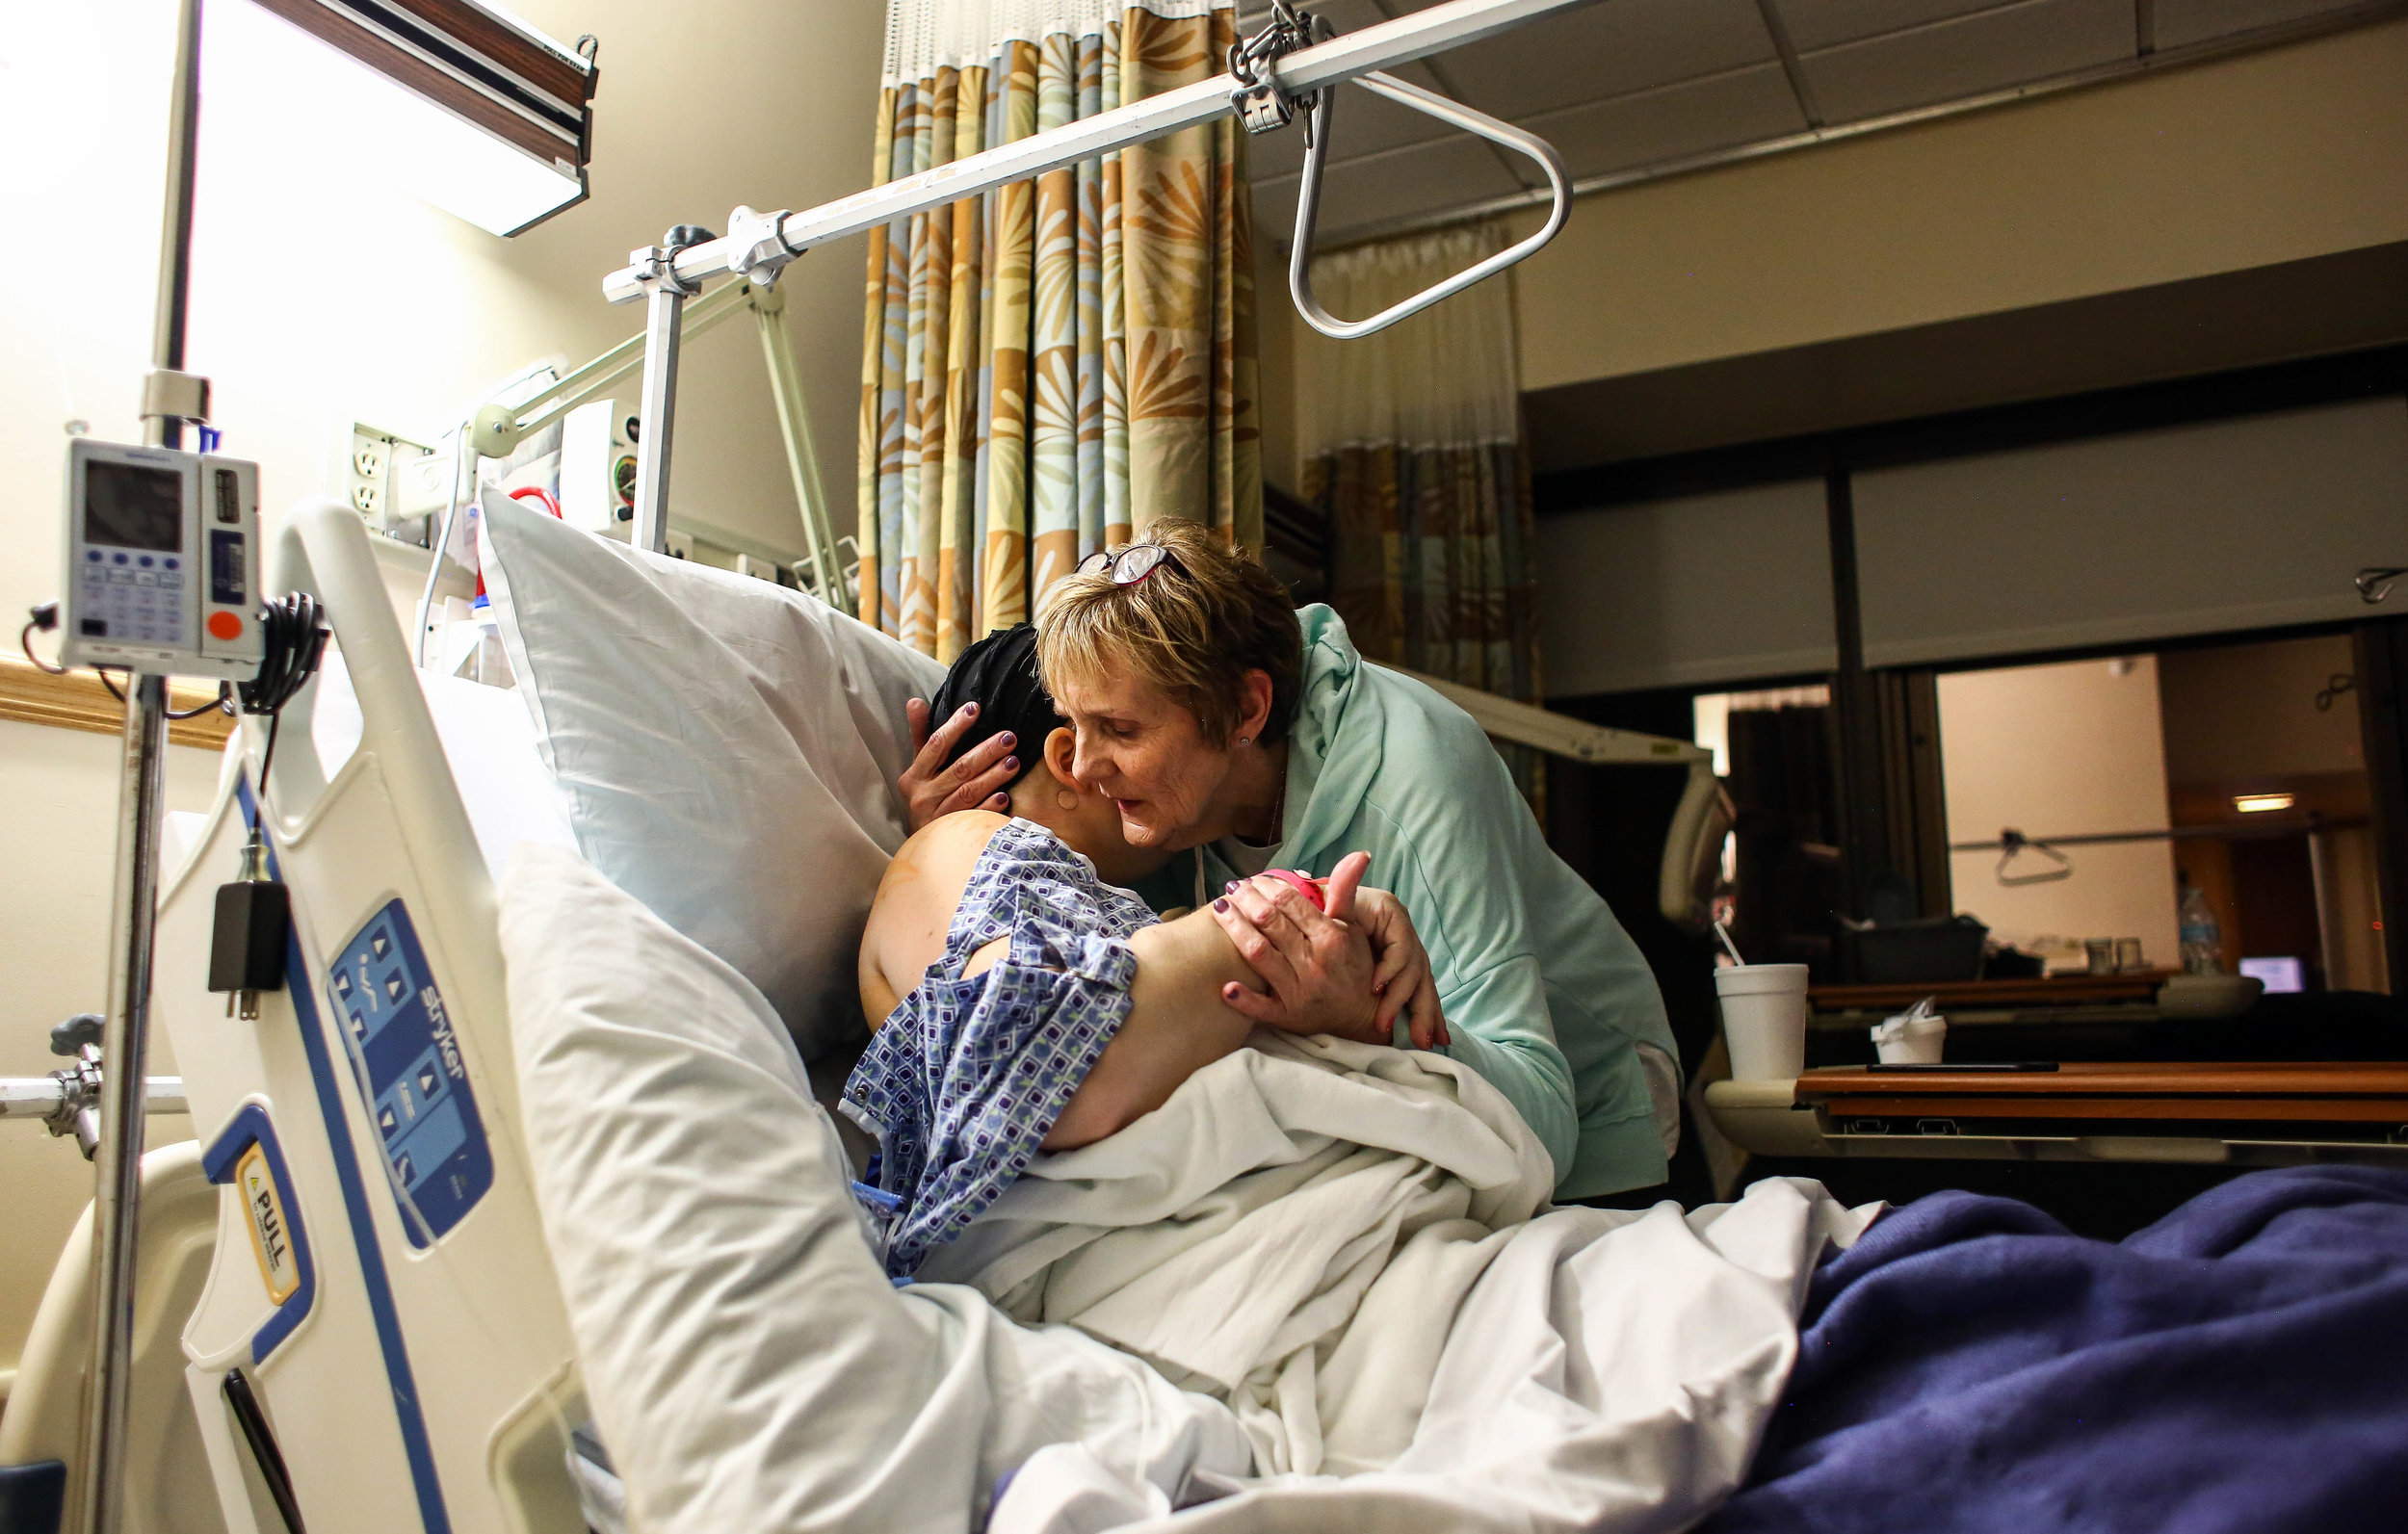  Janet Wegner hugs her daughter Amanda Cihak after her double mastectomy surgery at the Mercy Health Hackley Campus, in Muskegon, Michigan on Thursday, March 14, 2019. Wegner is a stage 3 breast cancer survivor; it pains her to see her daughter go th